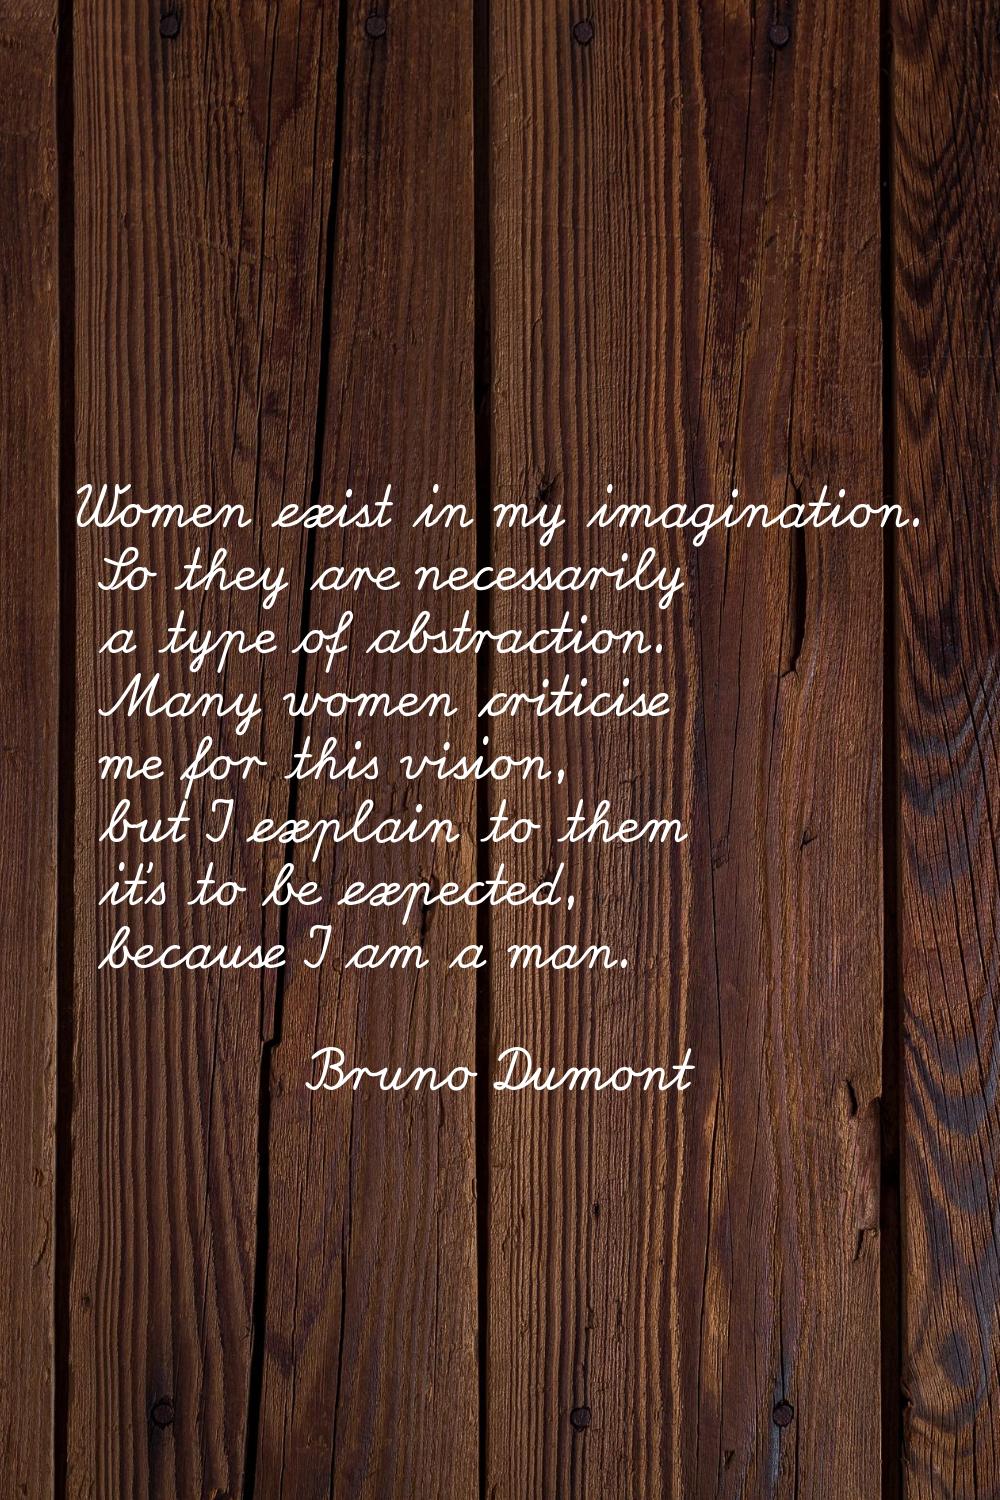 Women exist in my imagination. So they are necessarily a type of abstraction. Many women criticise 